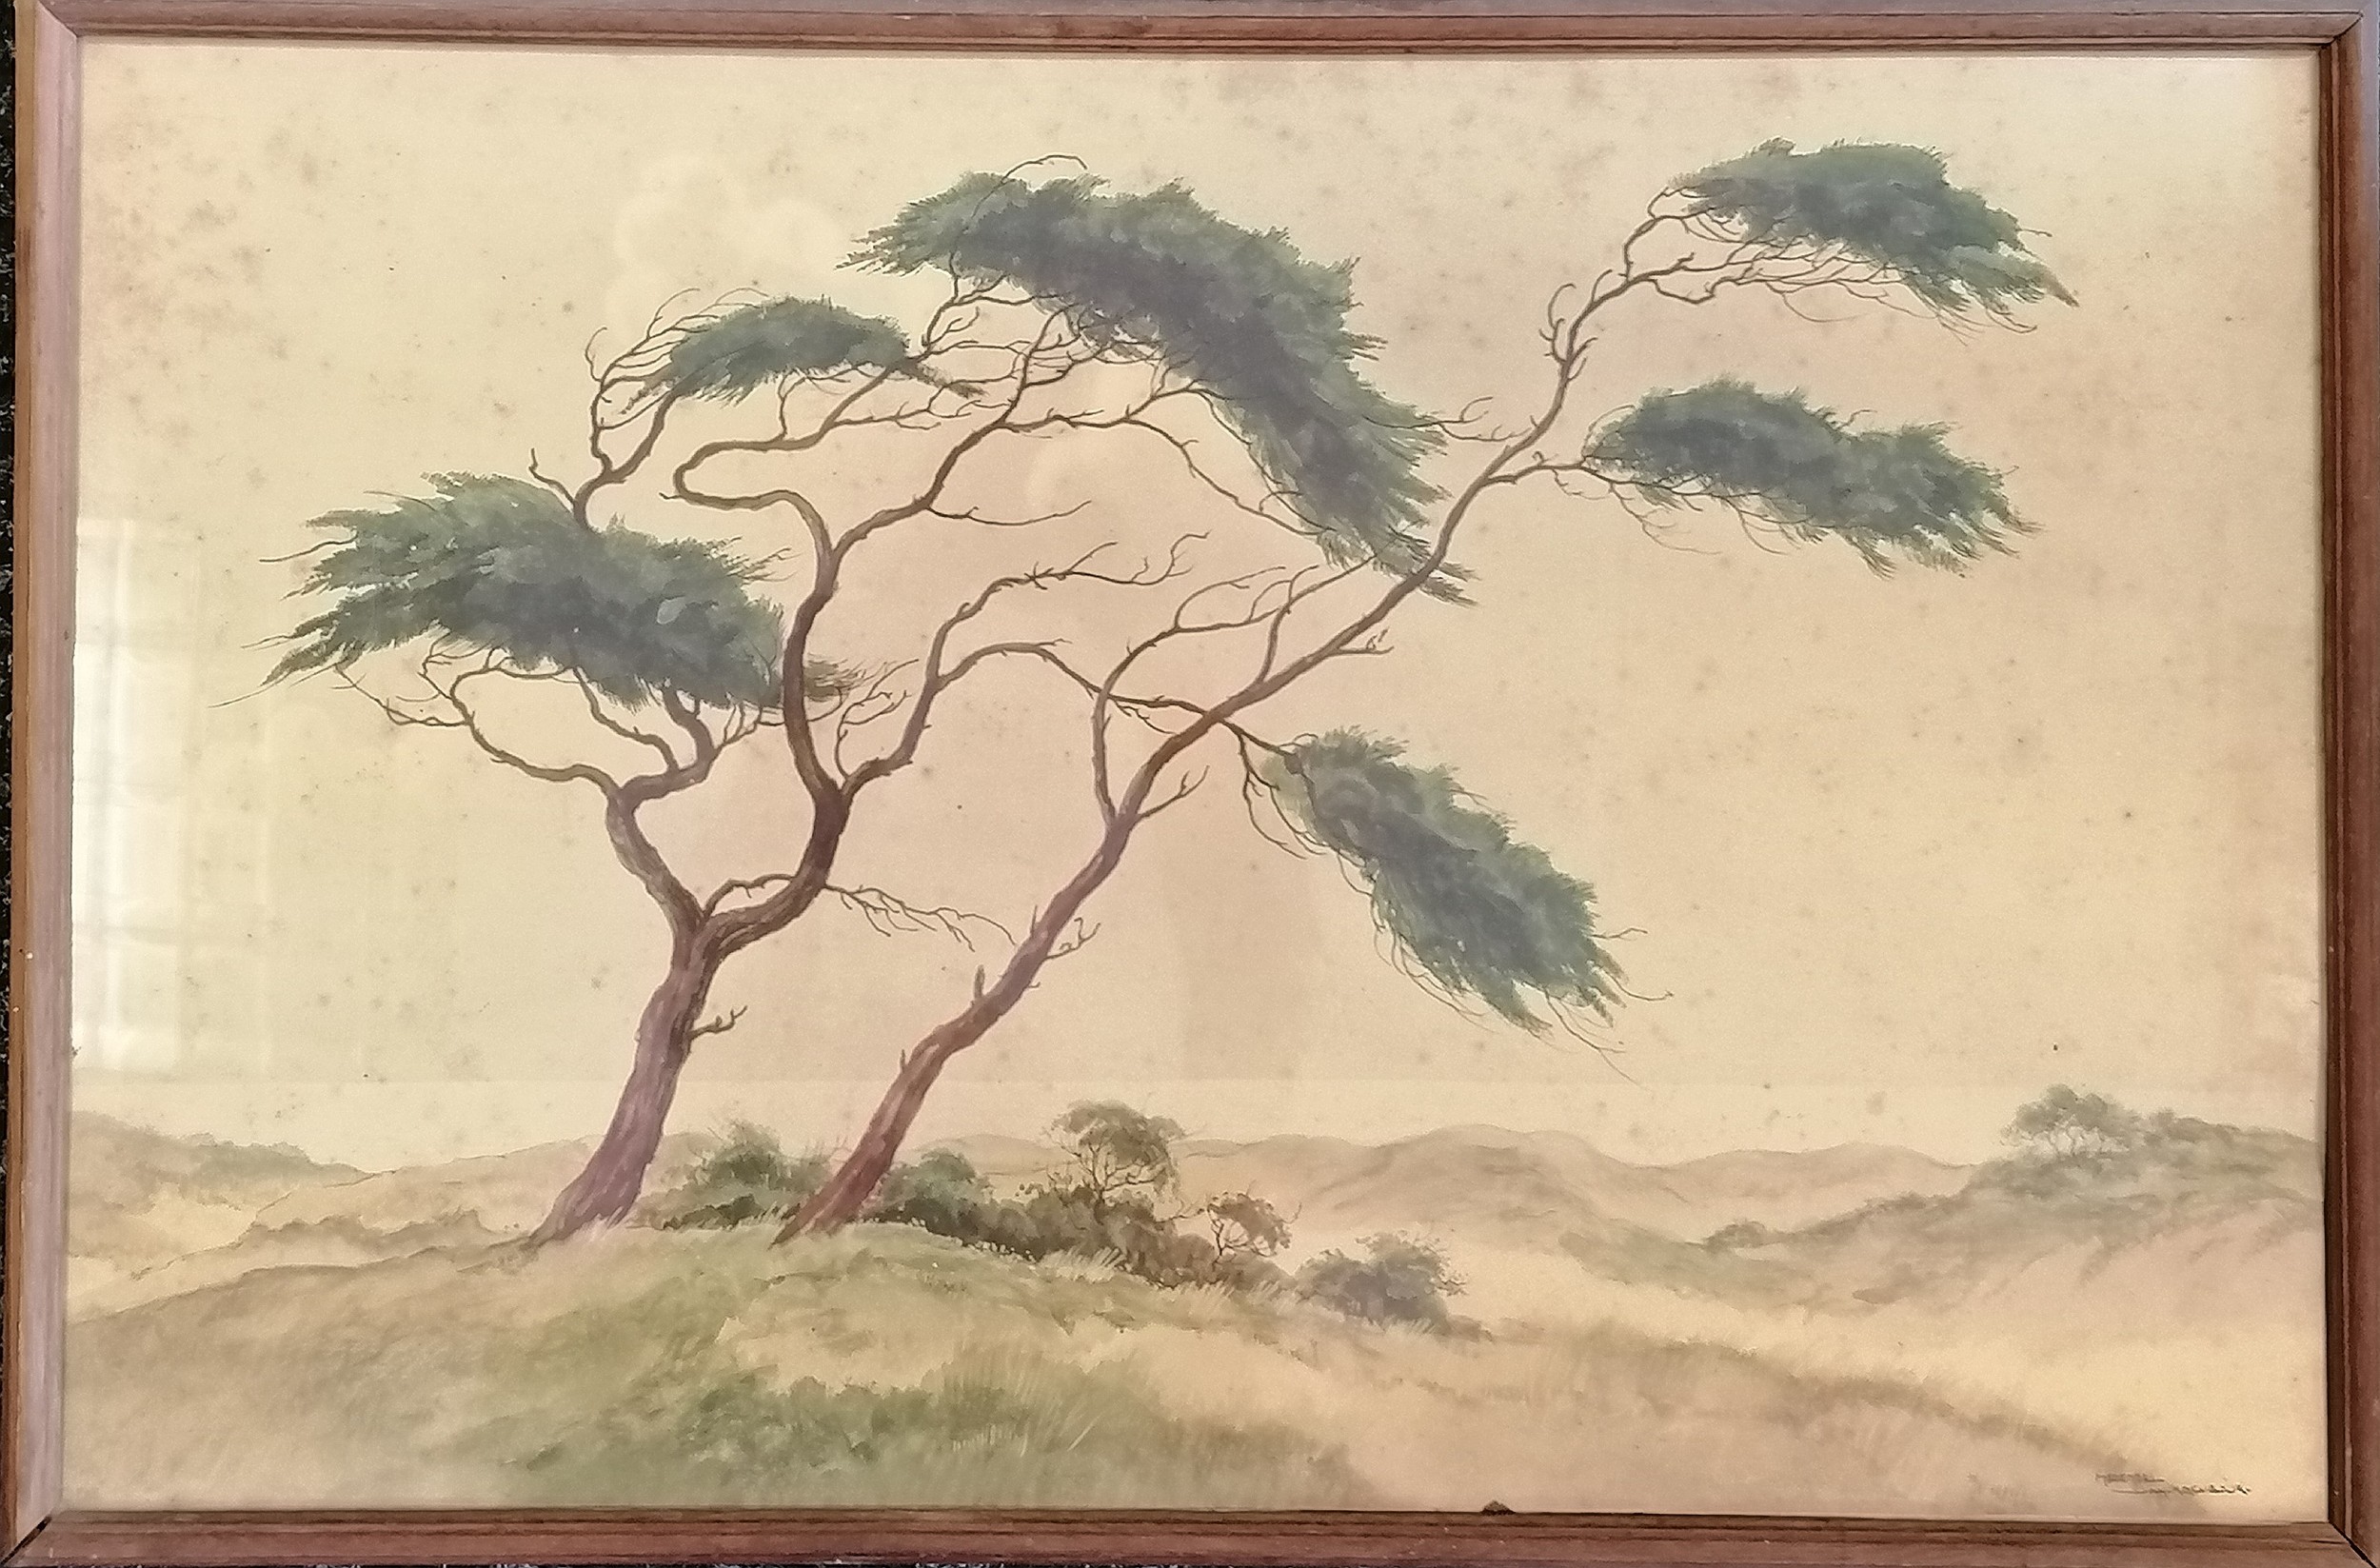 Framed print of some 'Pines on the dunes' by Jan Kagie (1907-91) - 53cm x 80cm & has some toning